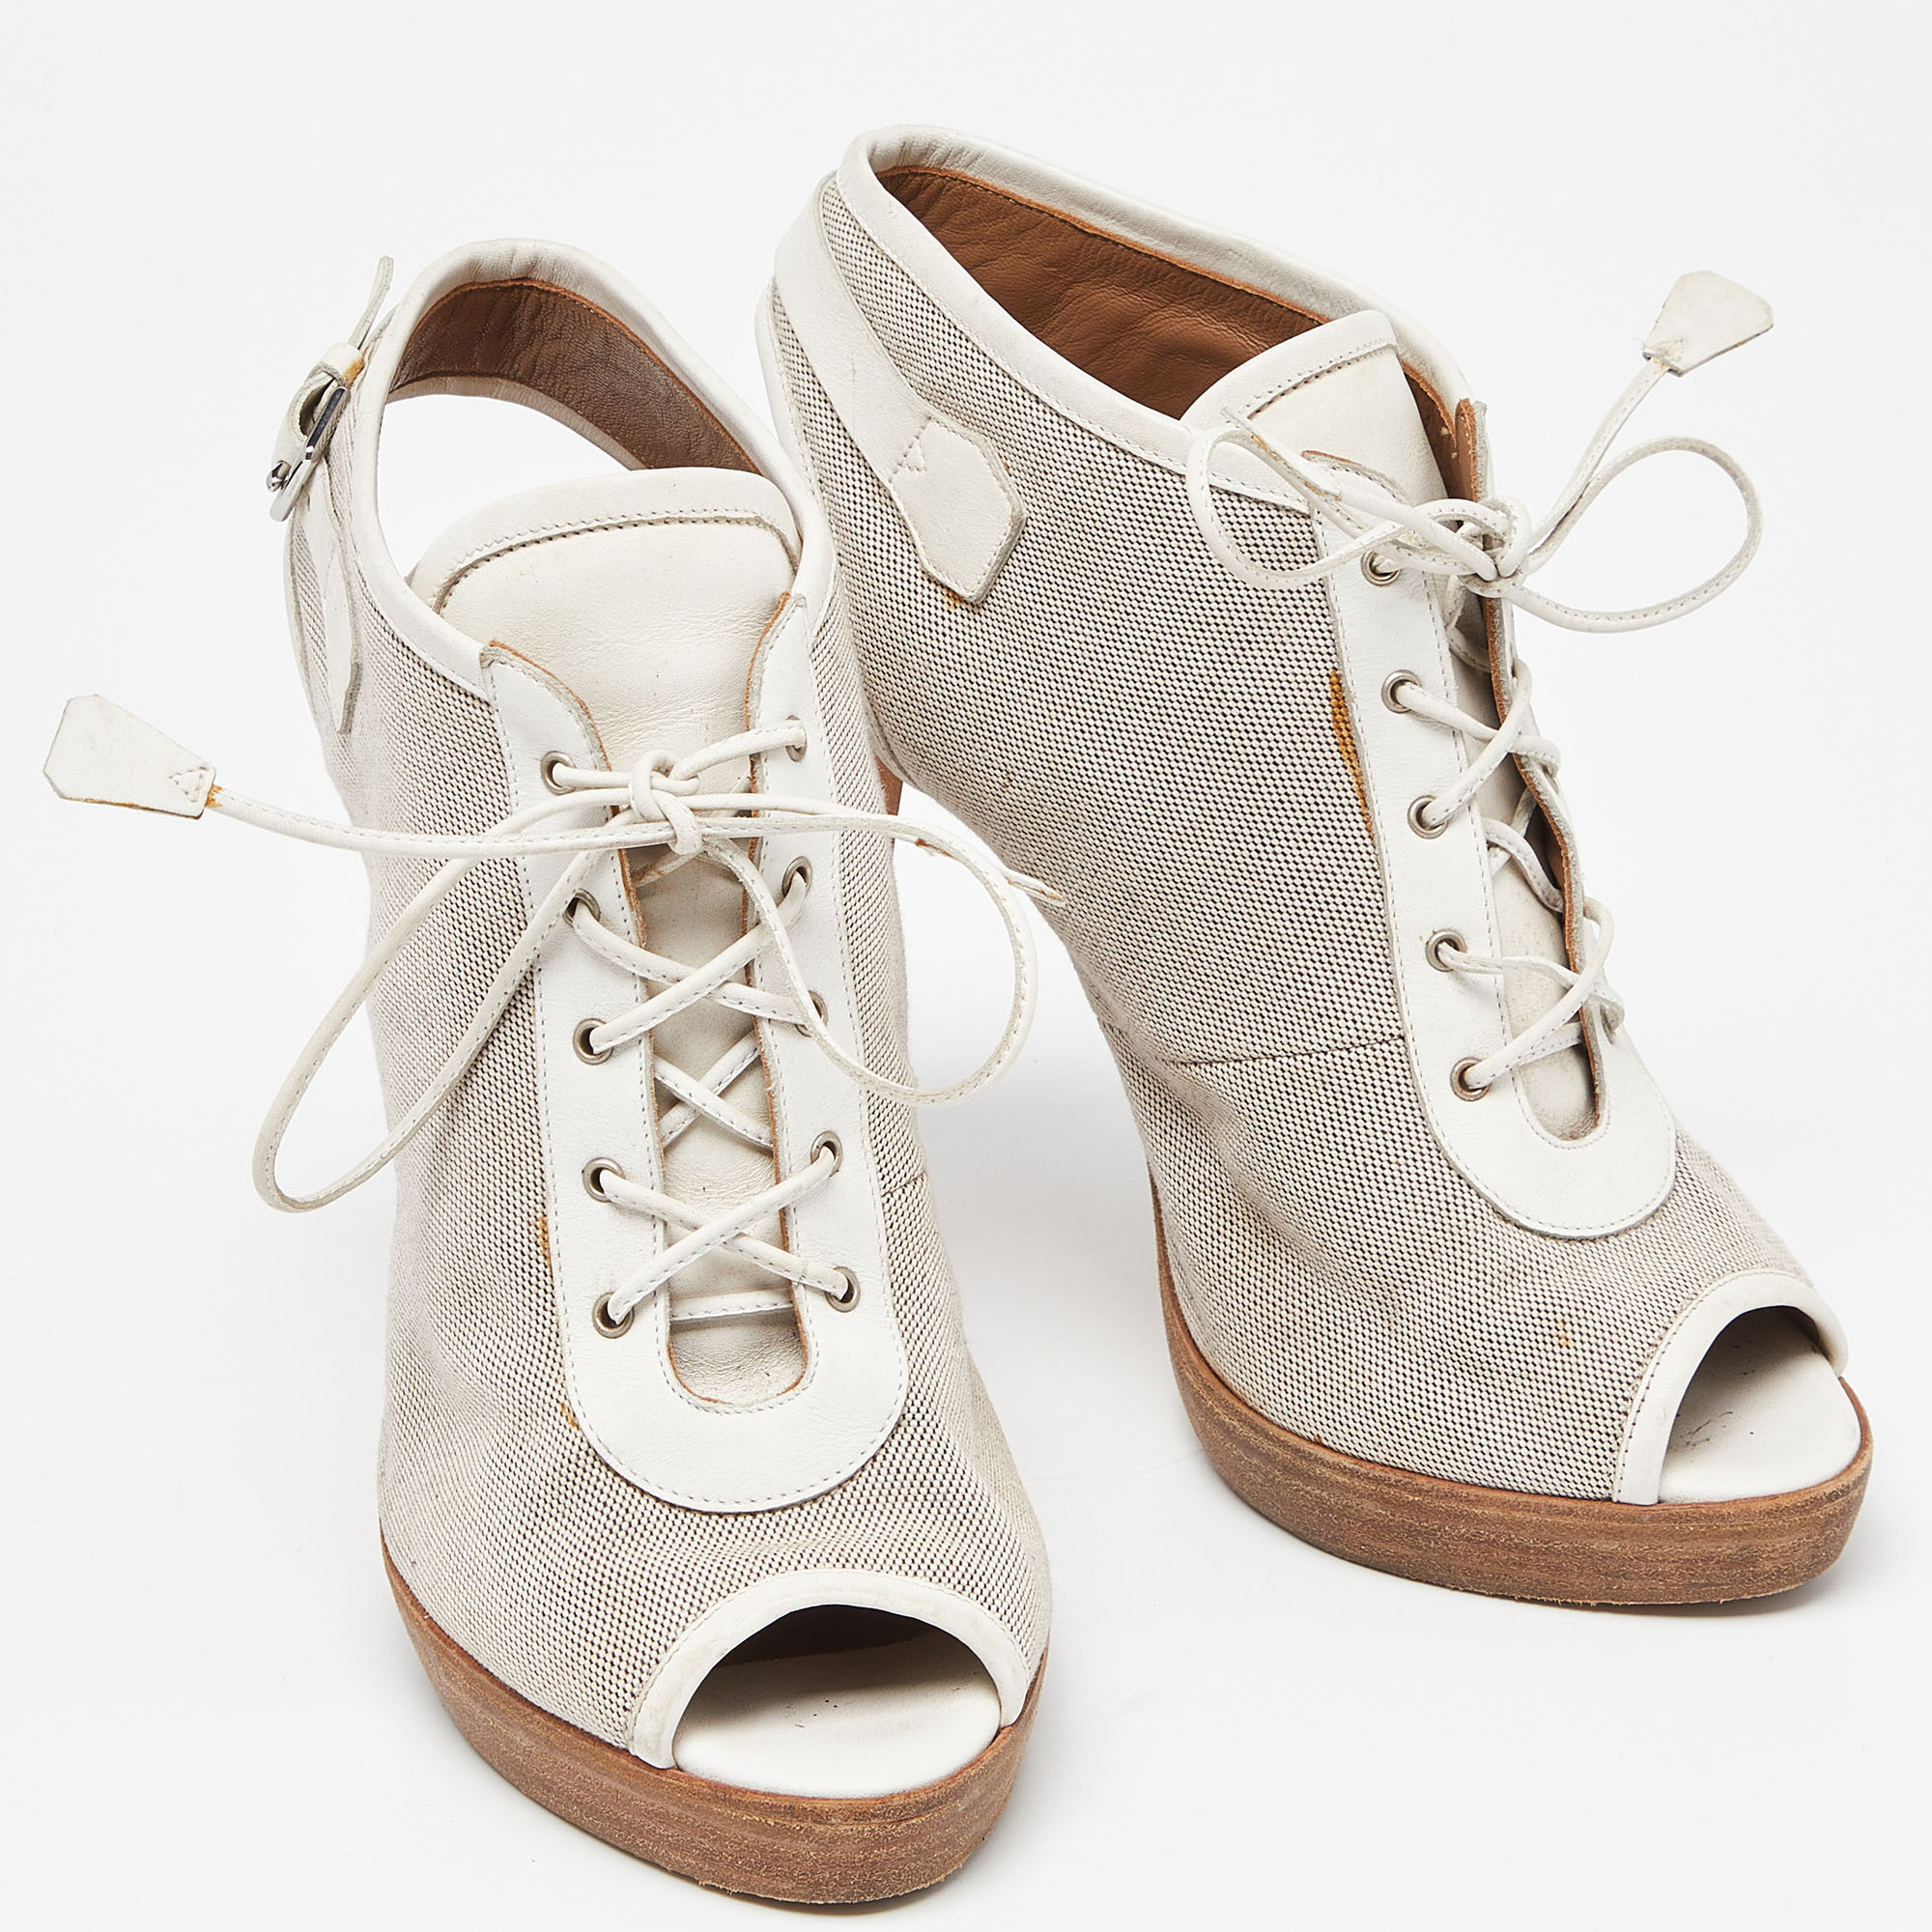 Hermes Grey/White Canvas And Leather Peep Toe Lace Up Slingback Booties Size 39